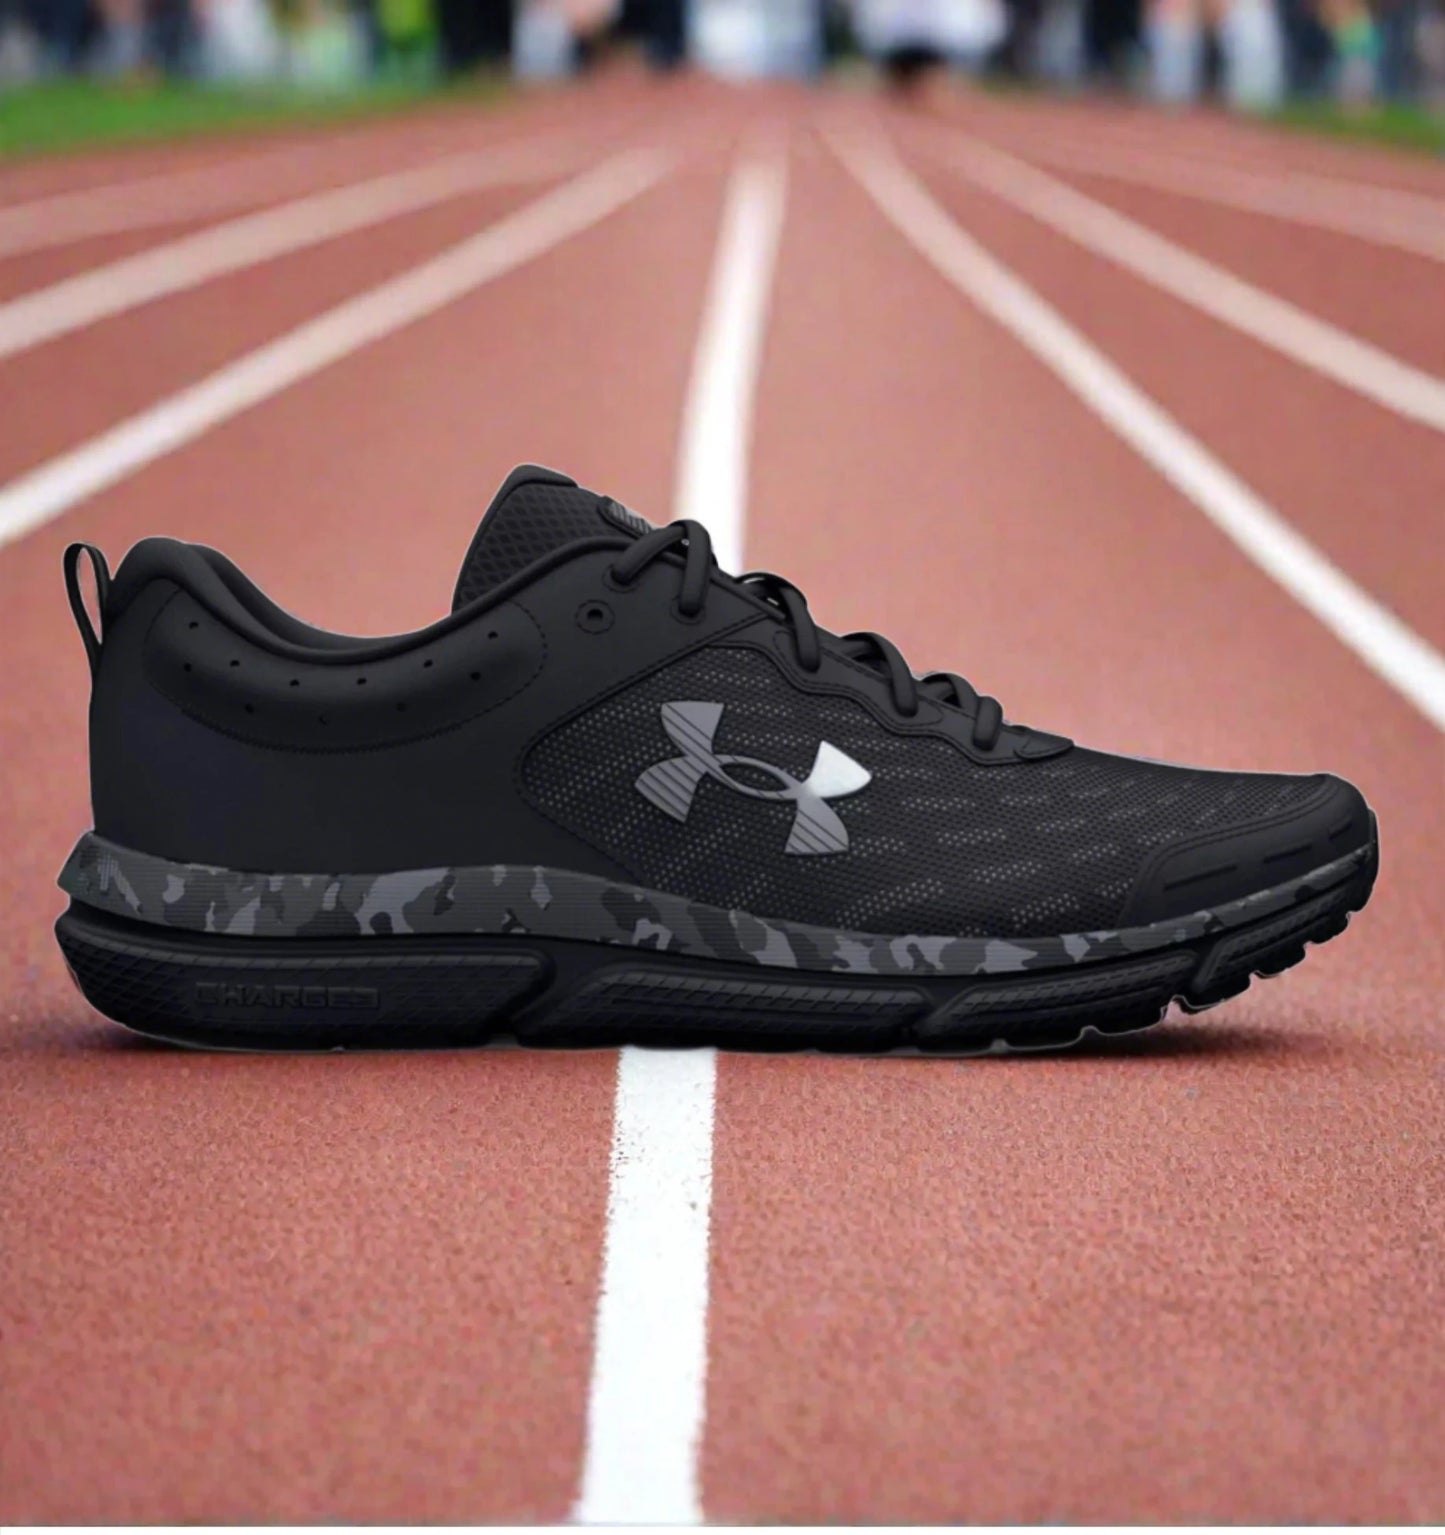 Under Armour Charged Assert 10 Camo Running Shoes